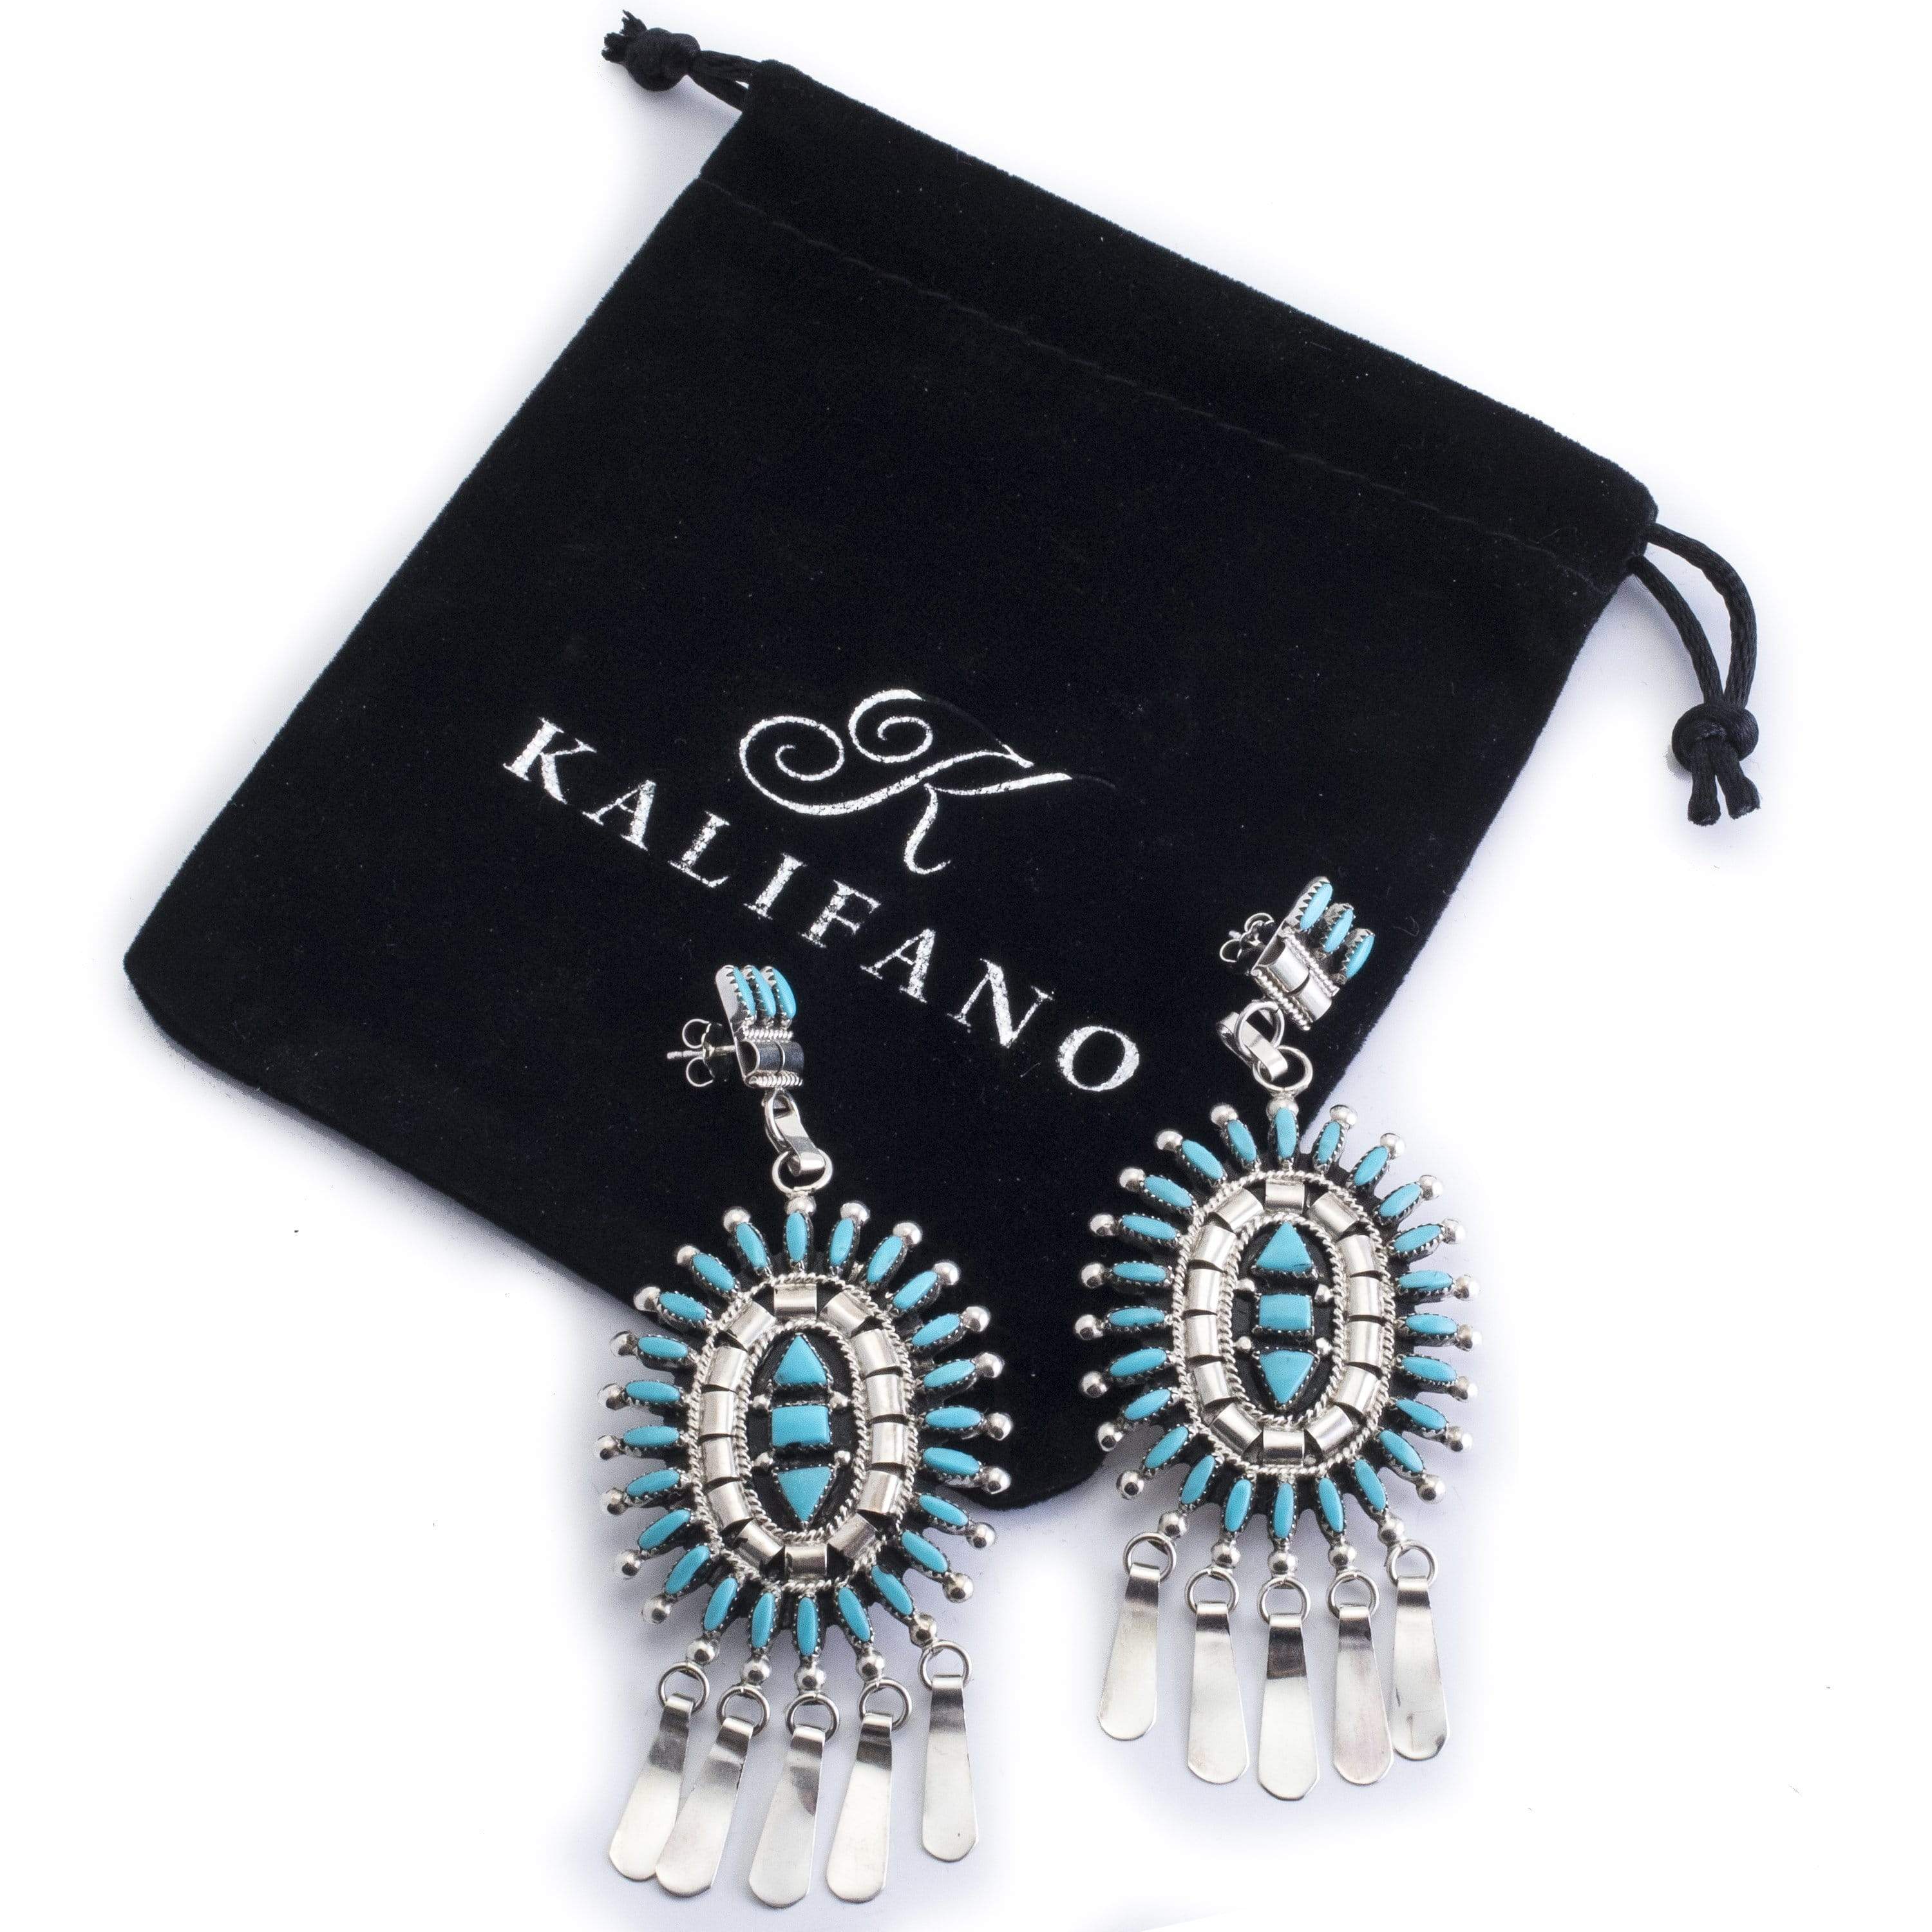 Kalifano Native American Jewelry Euome Hustito Kingman Turquoise Zuni Needle Point USA Native American Made 925 Sterling Silver Earrings with Stud Backing NAE1700.001